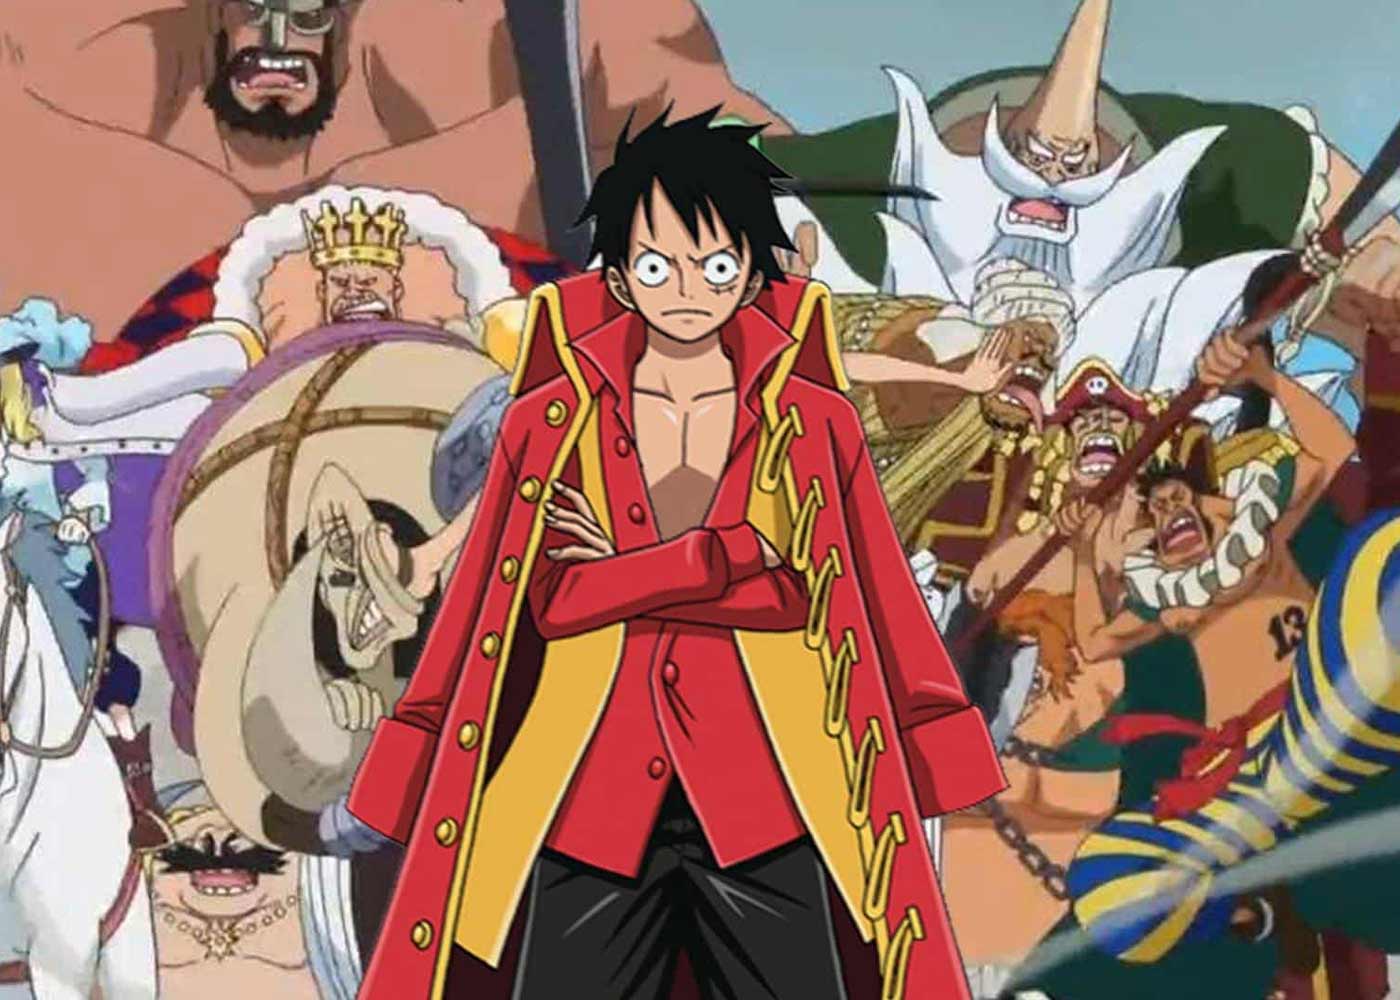 download video one piece full episode sub indo mp4